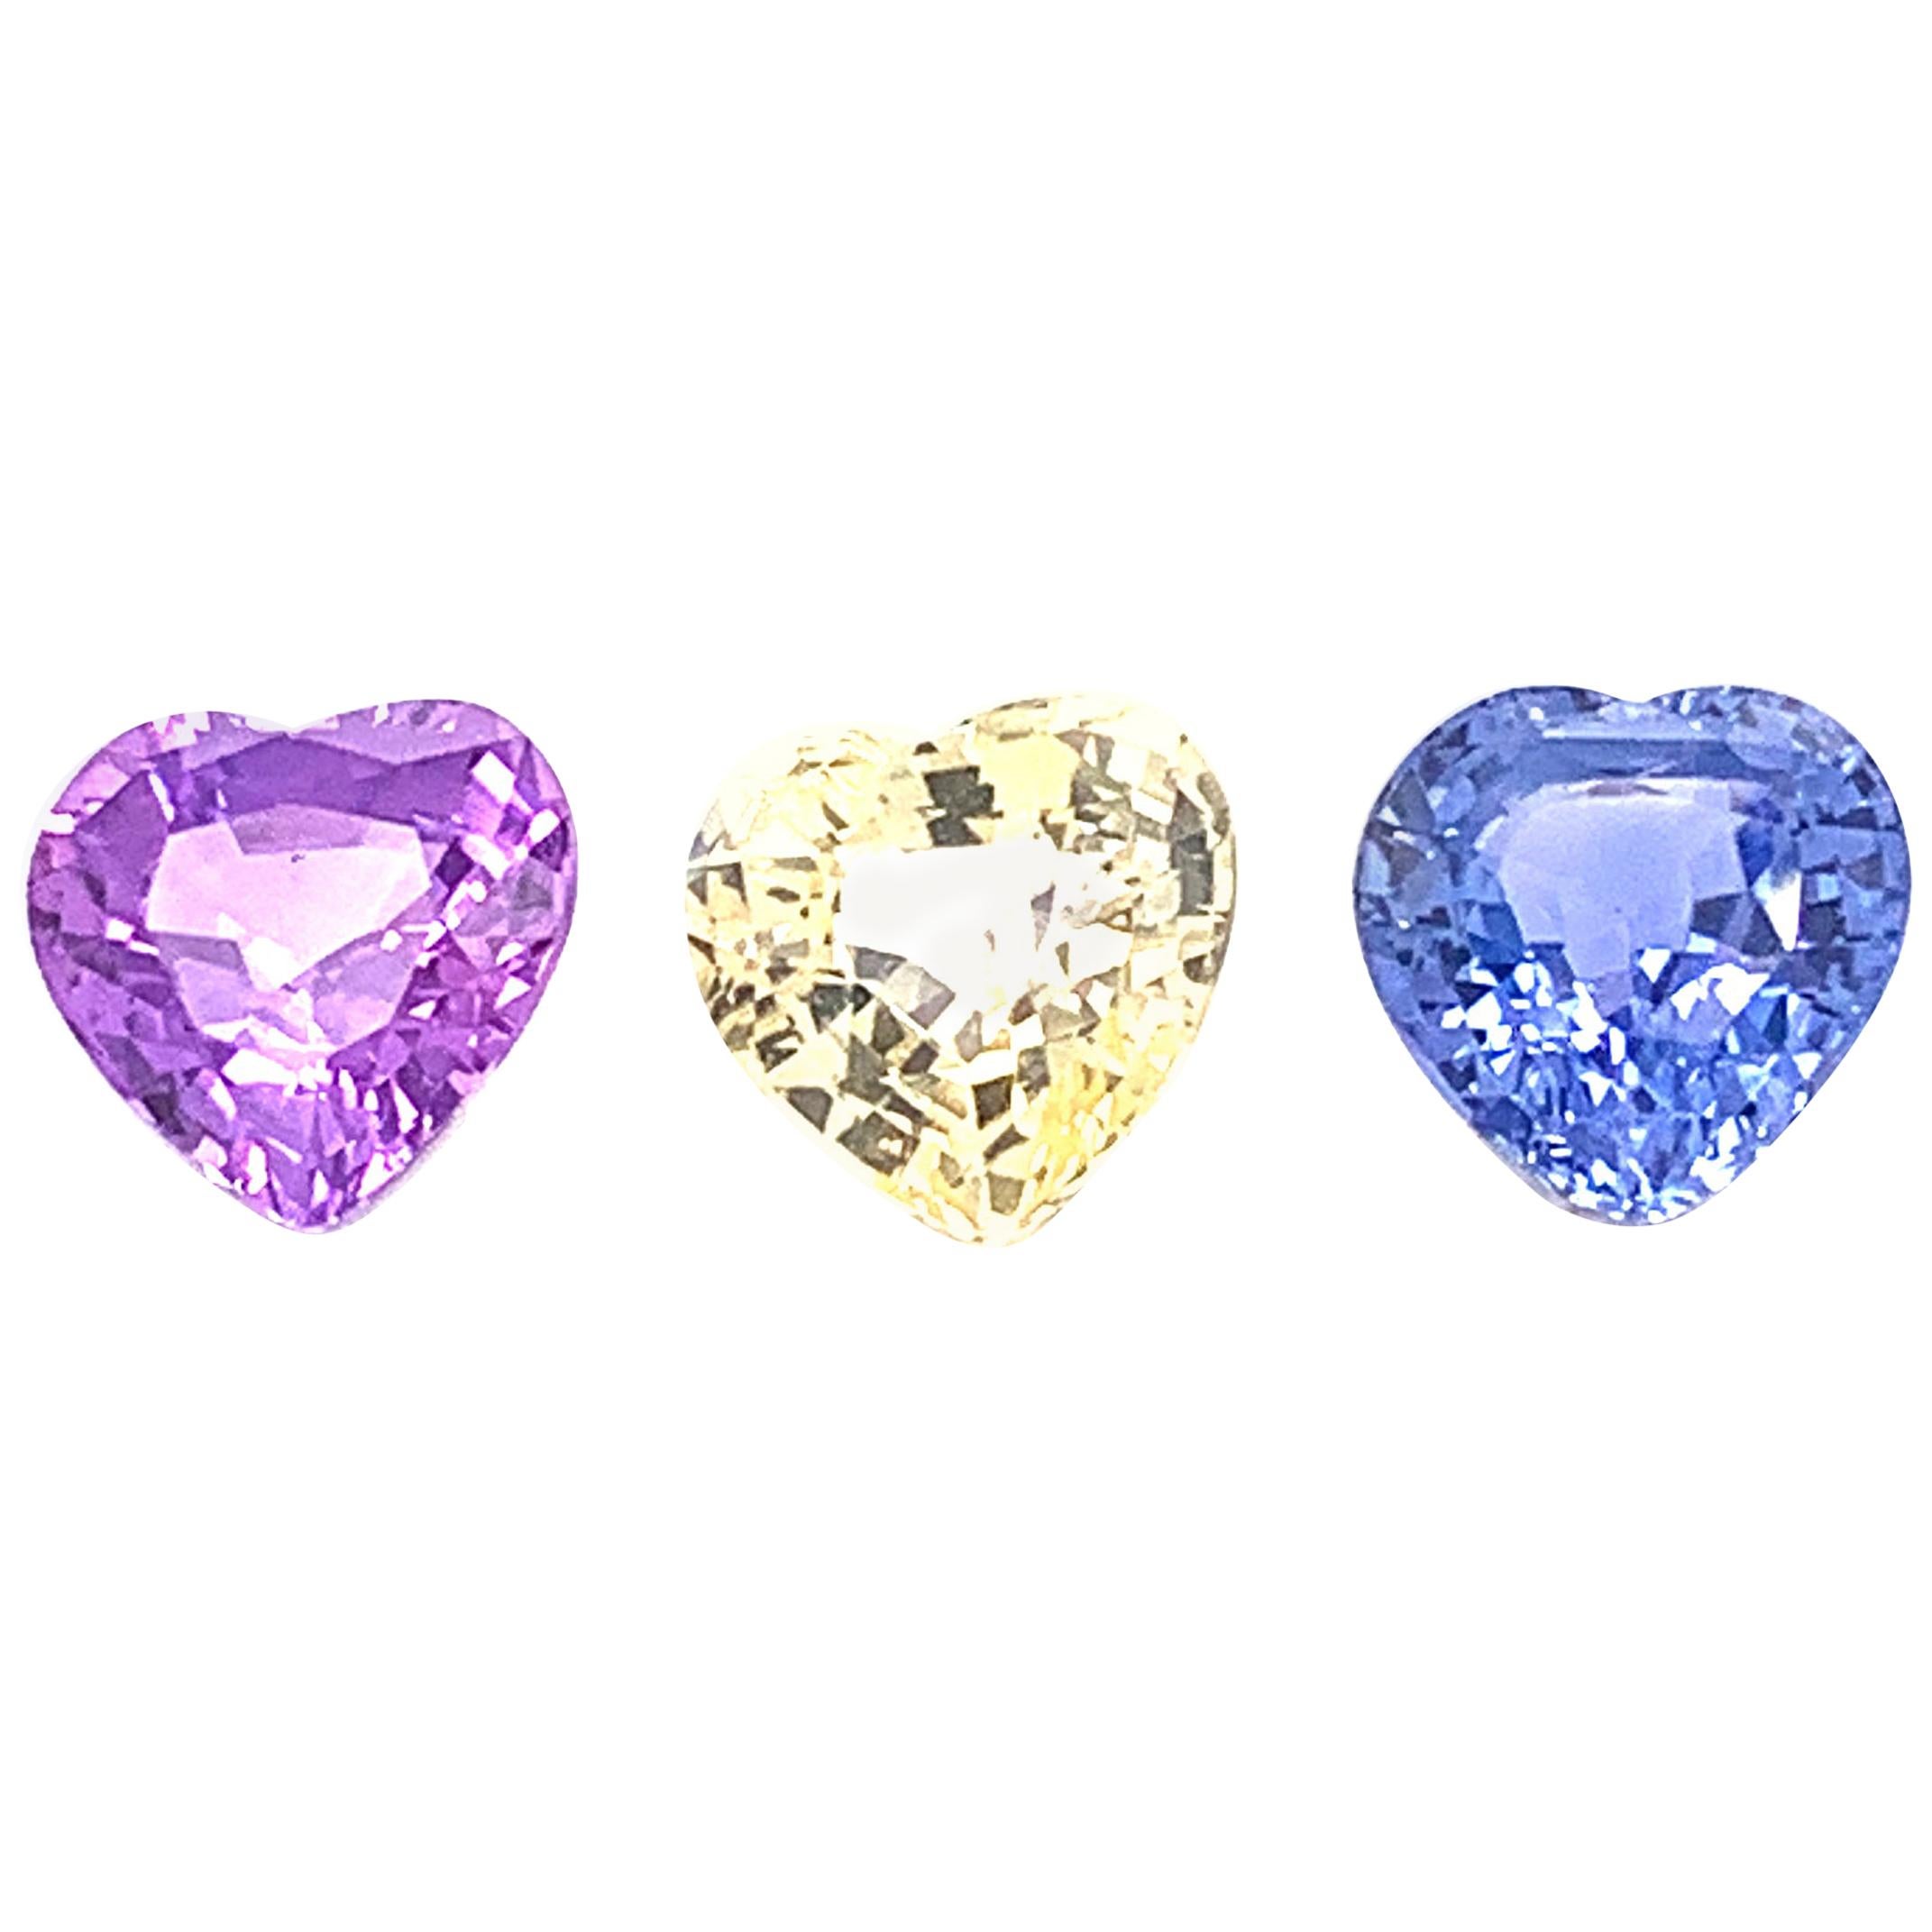 7.22 Carat Heart-Shaped Unheated Blue, Pink, and Yellow Sapphire Trio For Sale